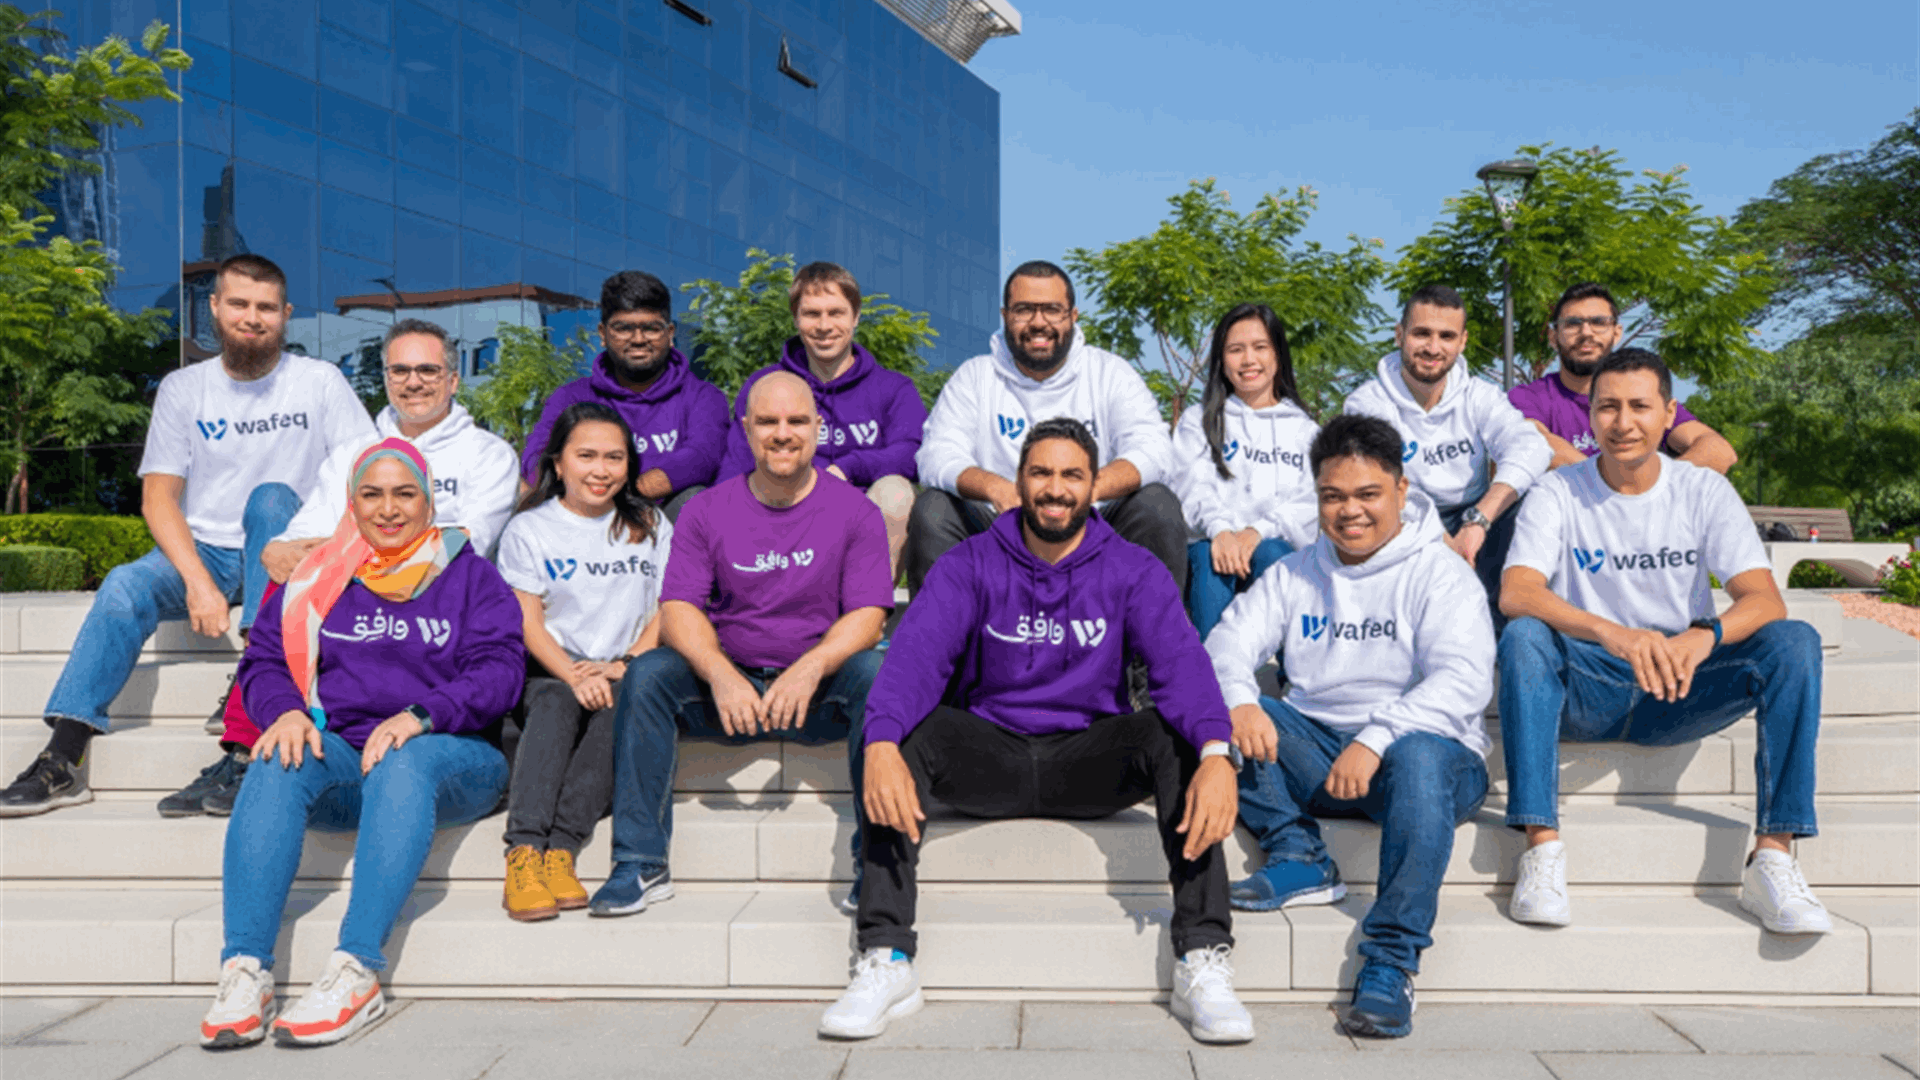 Dubai-based accounting and financial compliance startup, Wafeq, raises $3M